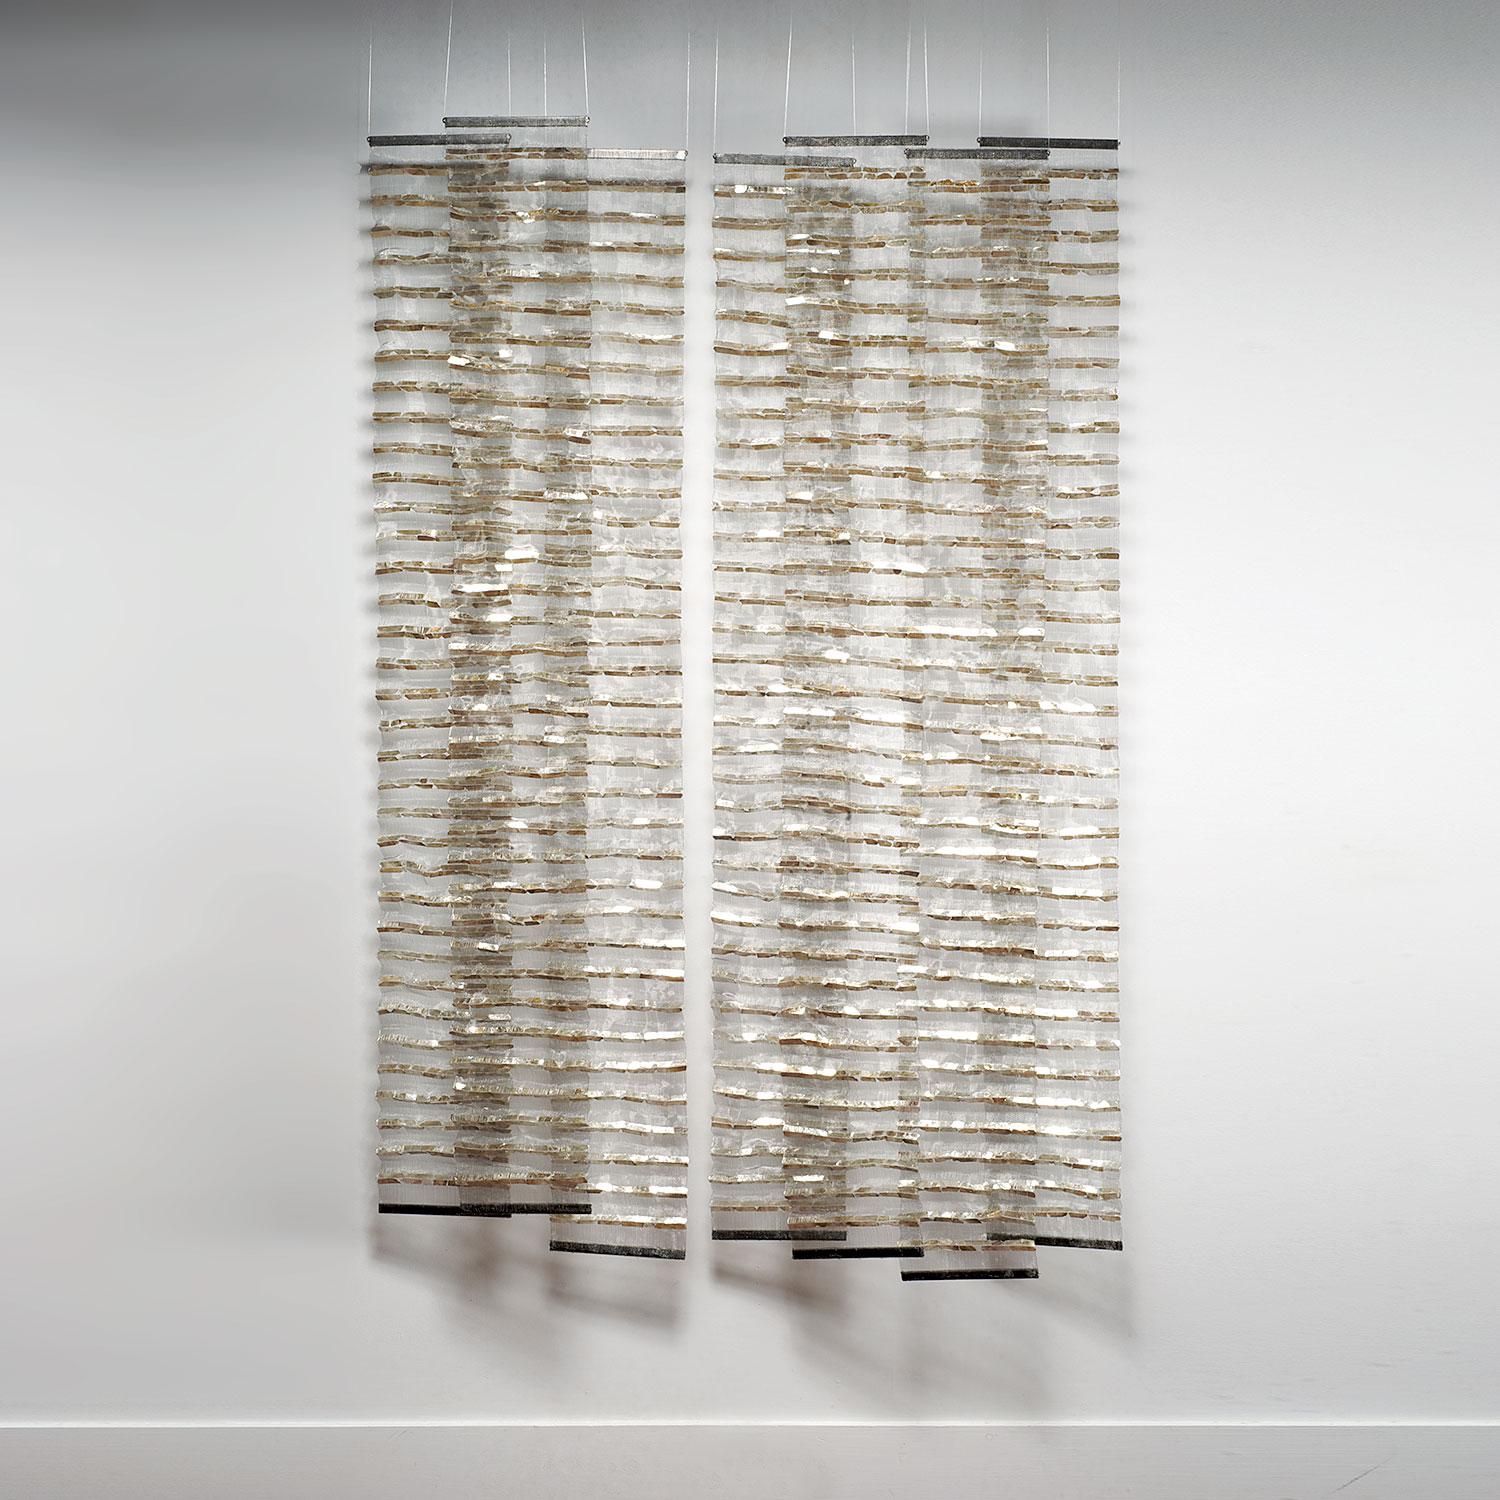 En Face, Mica and Steel Woven Wall Hanging and Installation, Agneta Hobin